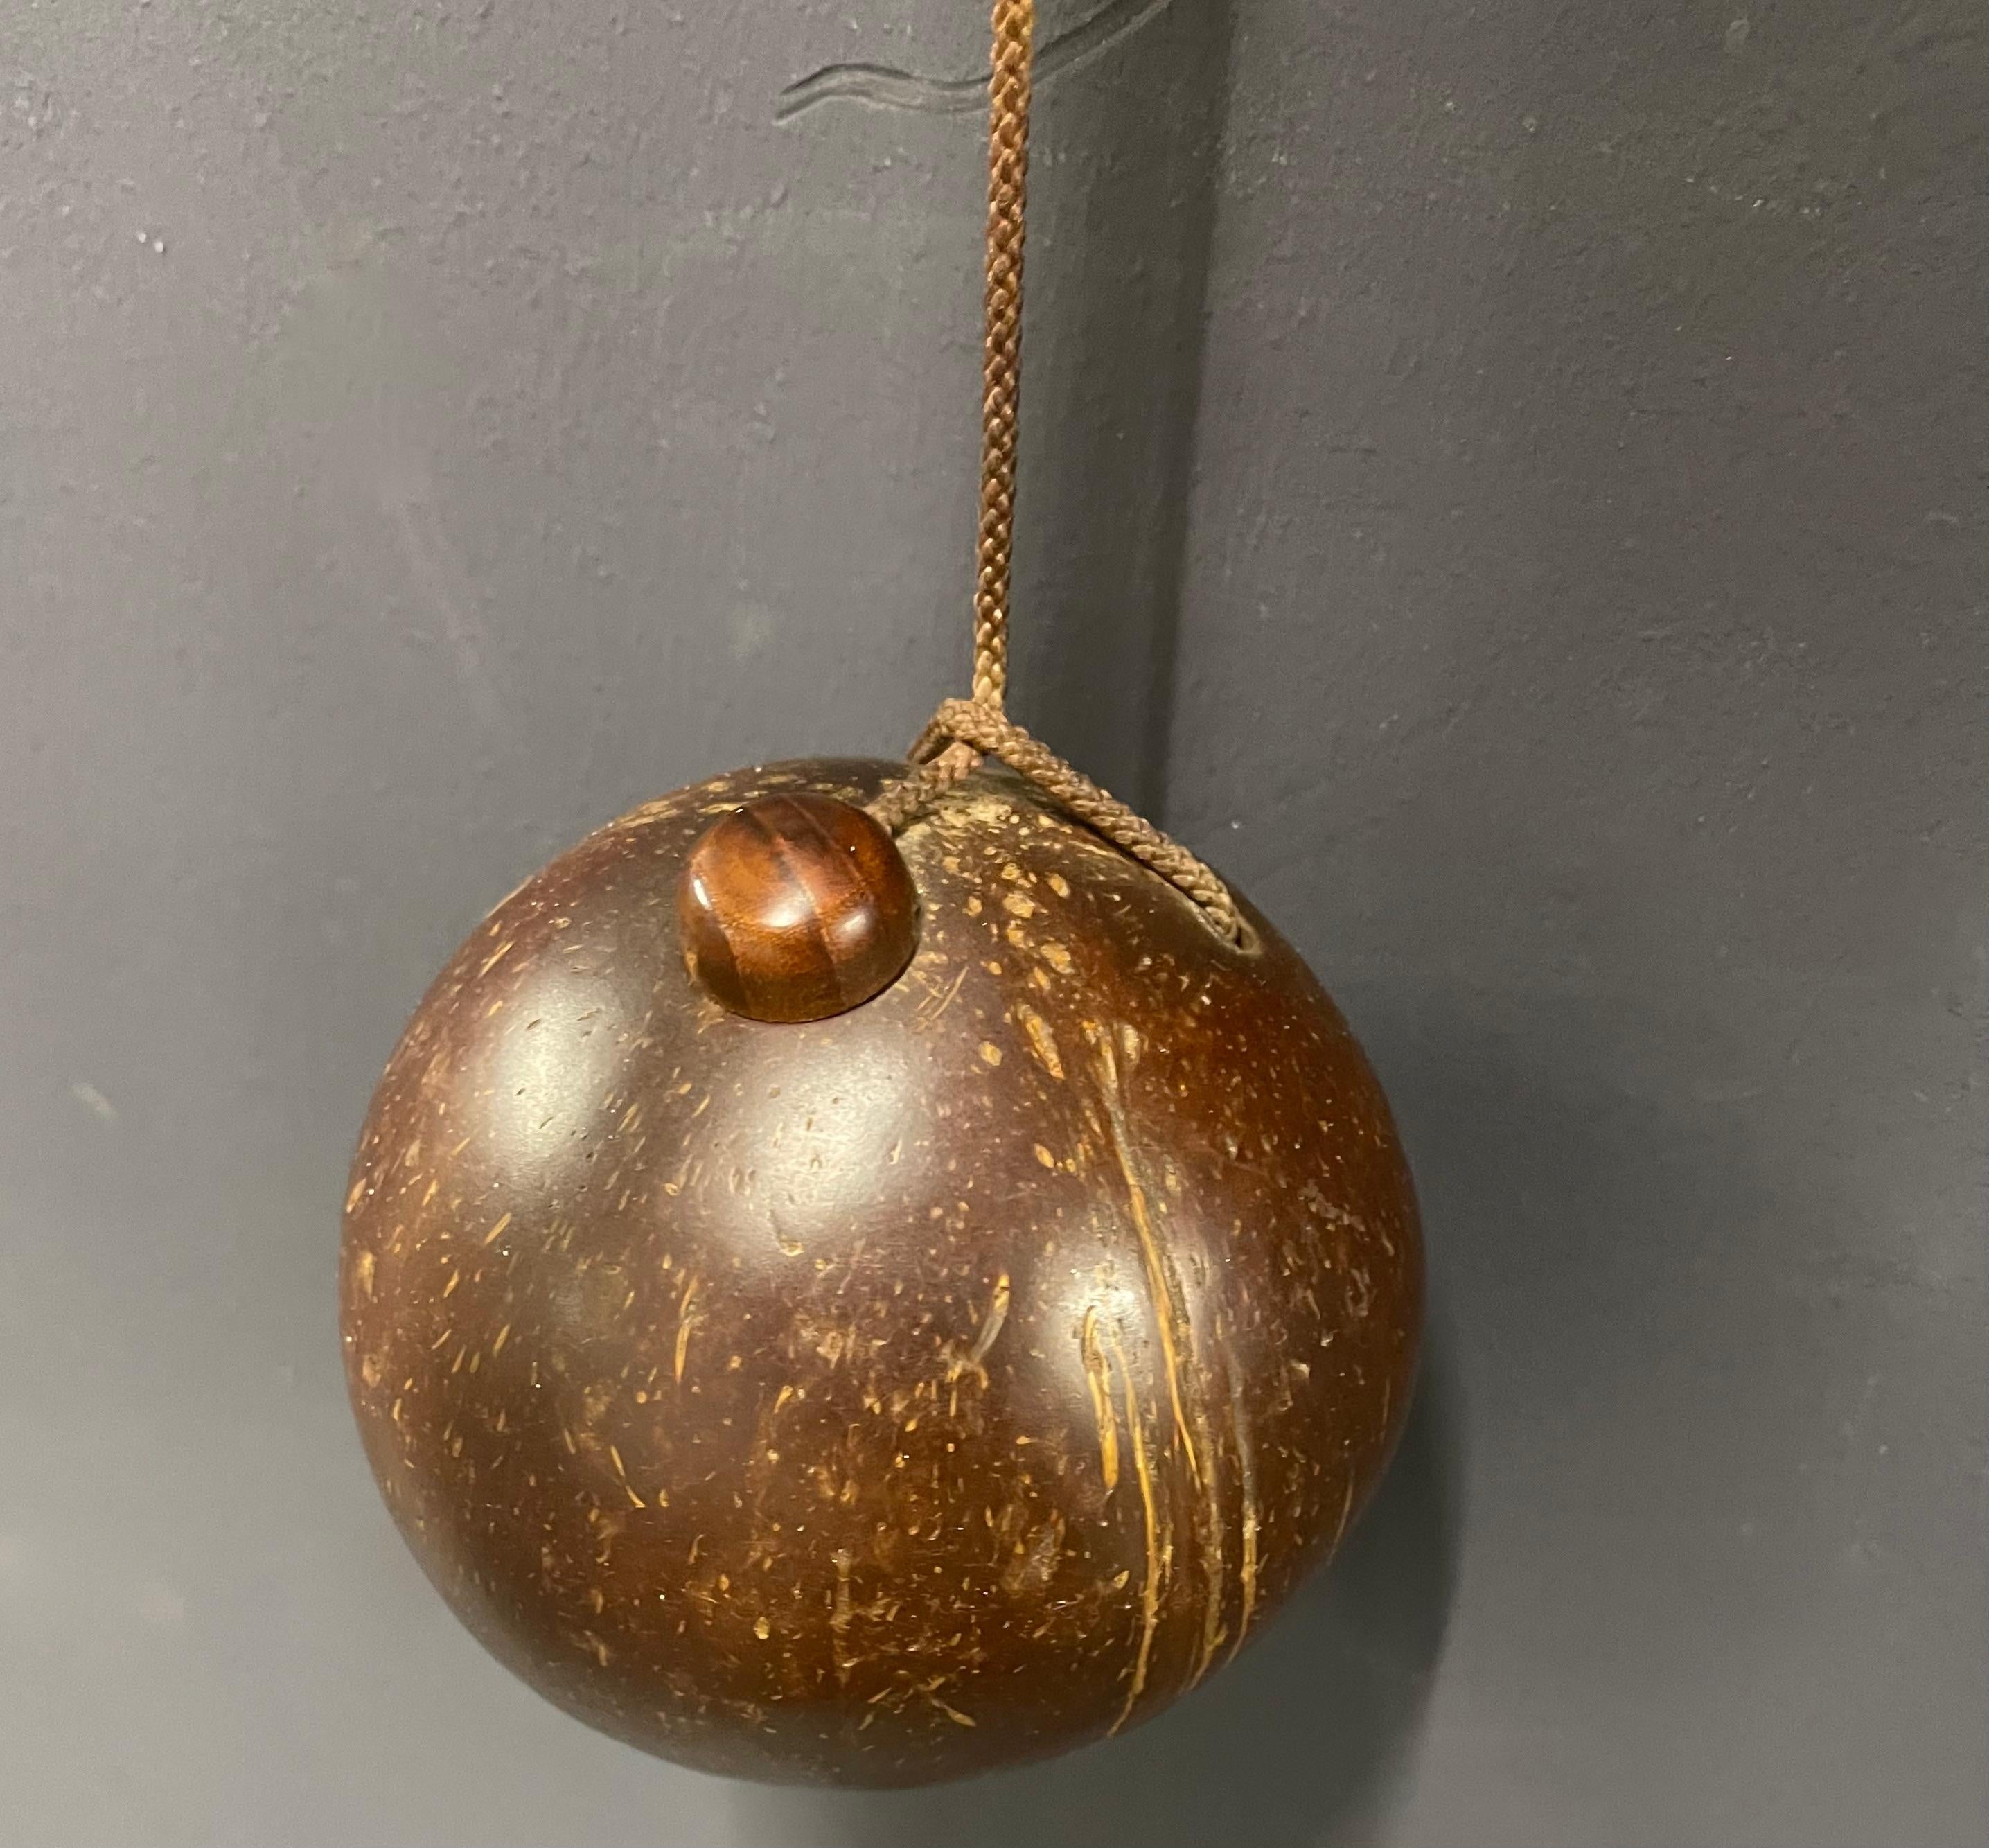 breathtaking coconut weight wall lamp by skrip For Sale 11